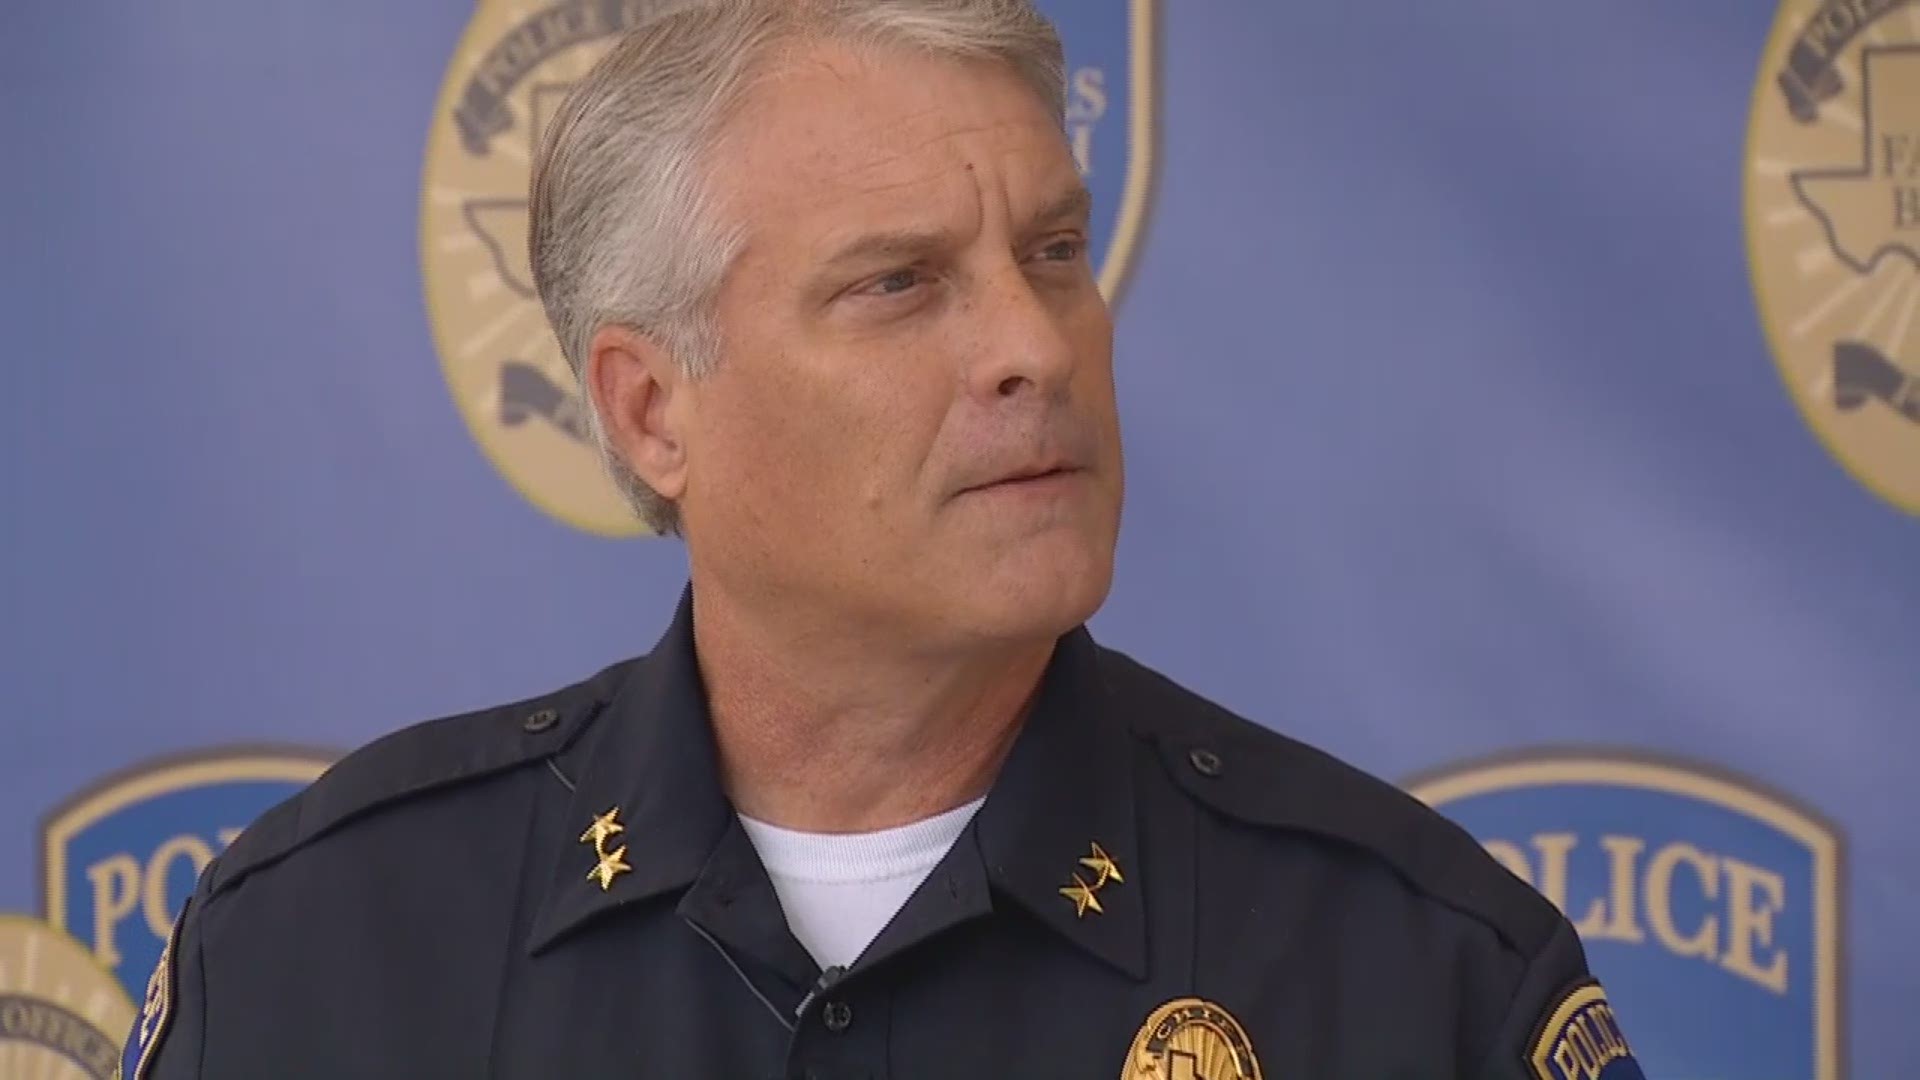 RAW VIDEO: Farmers Branch Police Chief holds news conference after indictment of officer (Part 2)